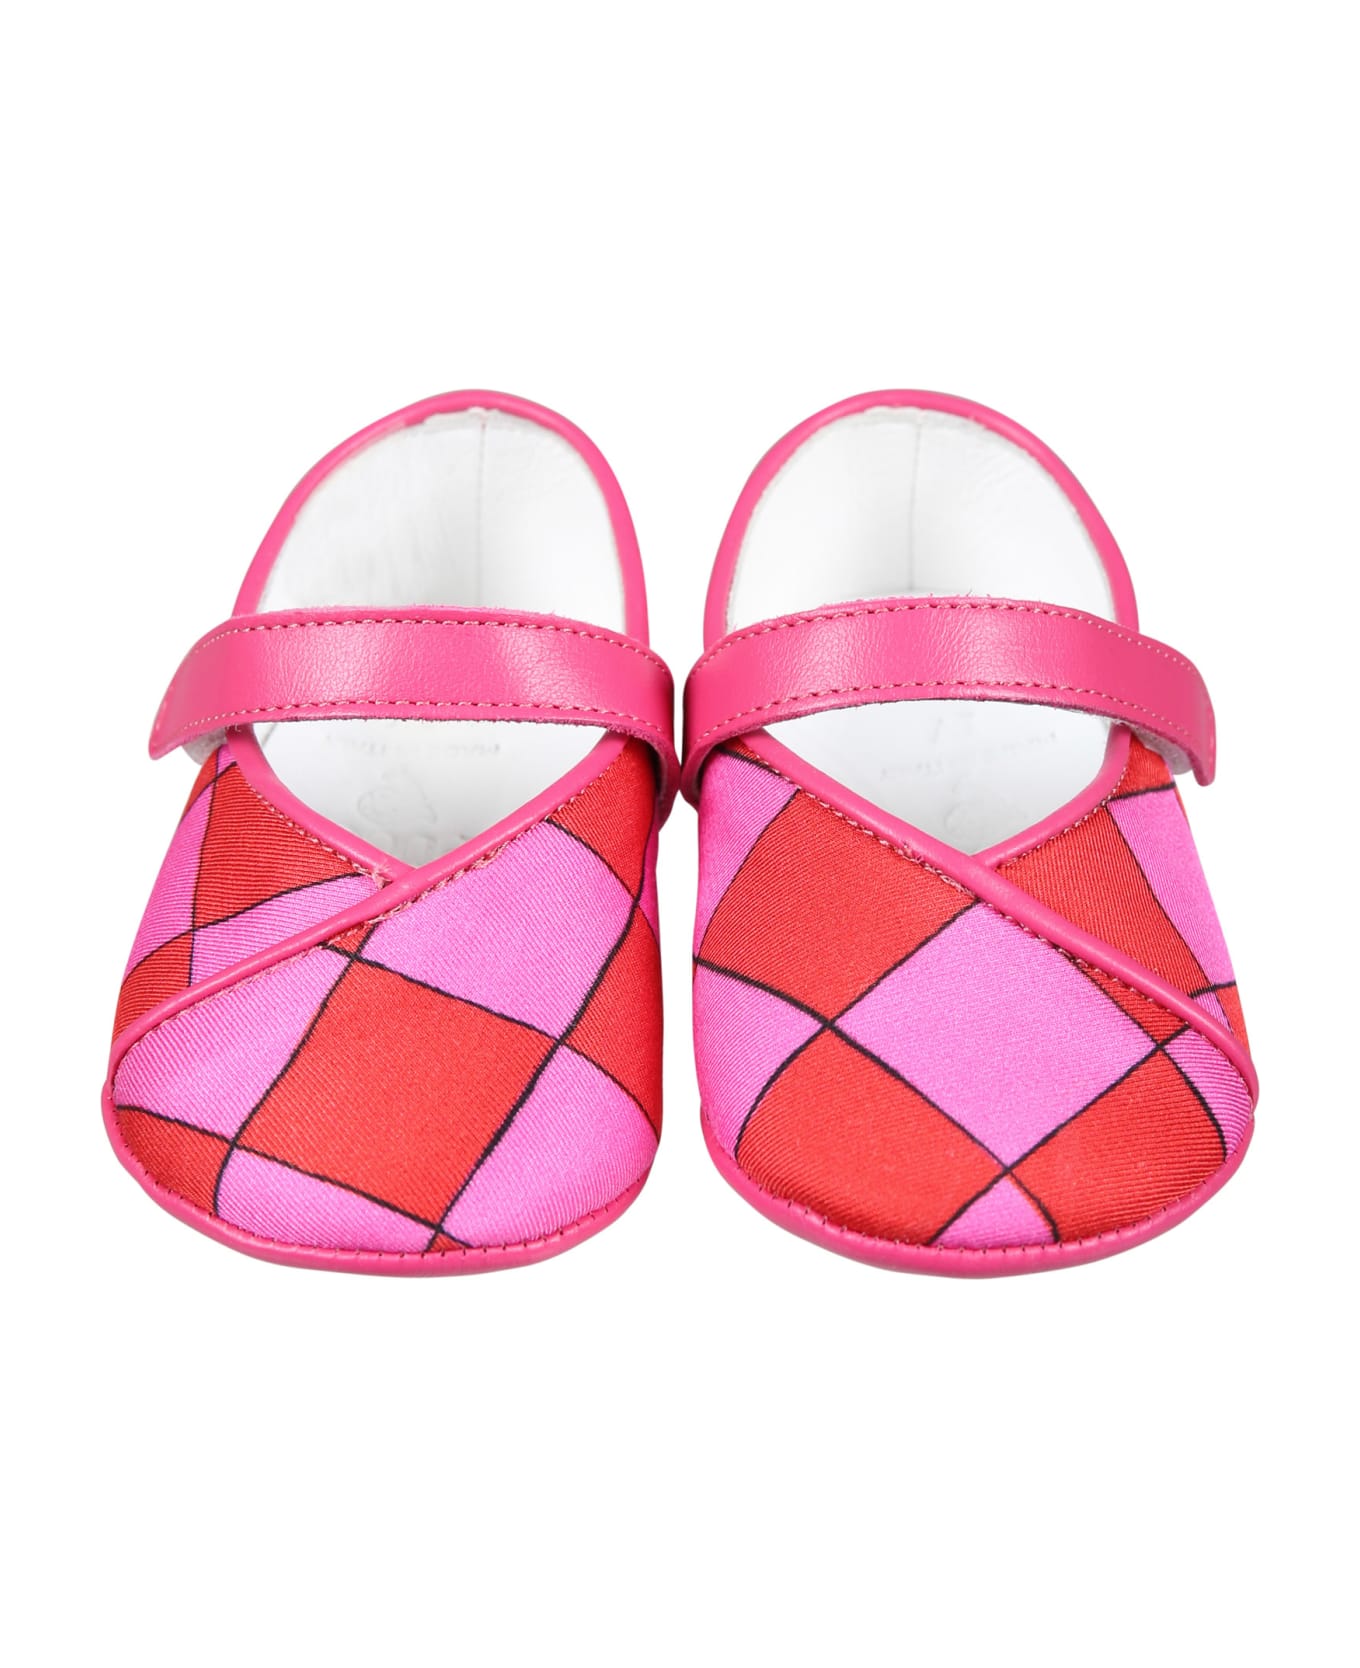 Pucci Multicolor Ballet Flats For Baby Girl With Iconic Multicolor Print - Multicolor シューズ